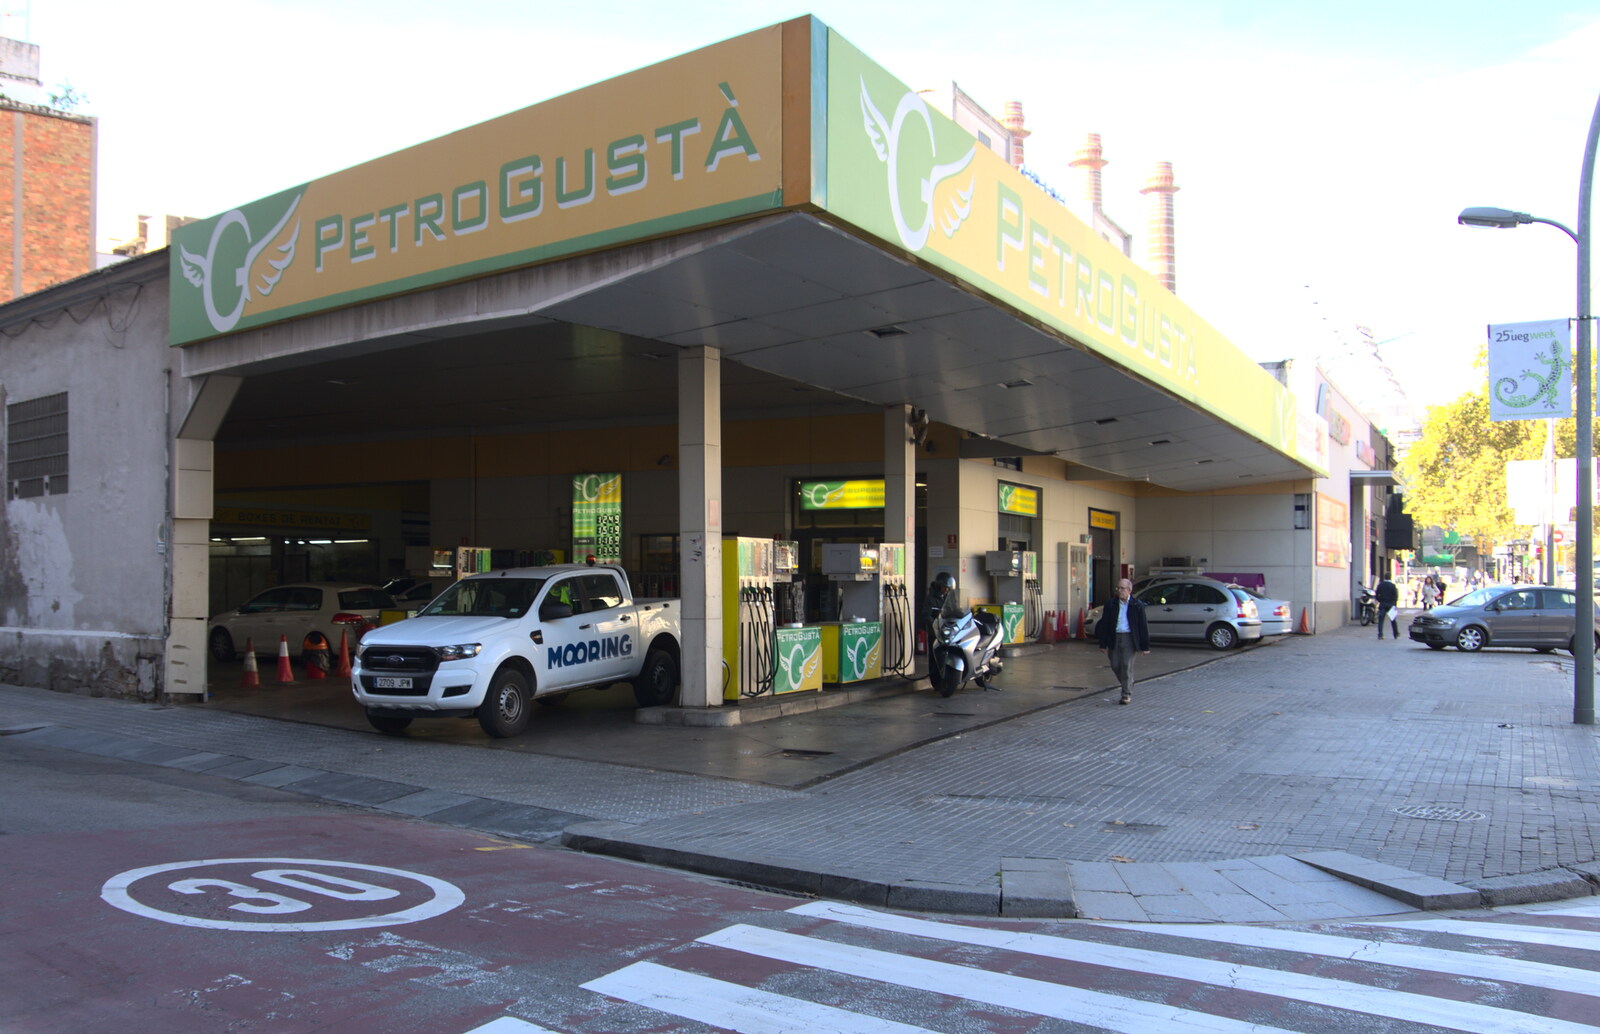 The Petro Gustá petrol station from A Barcelona Bus Tour, Catalonia, Spain - 25th October 2017